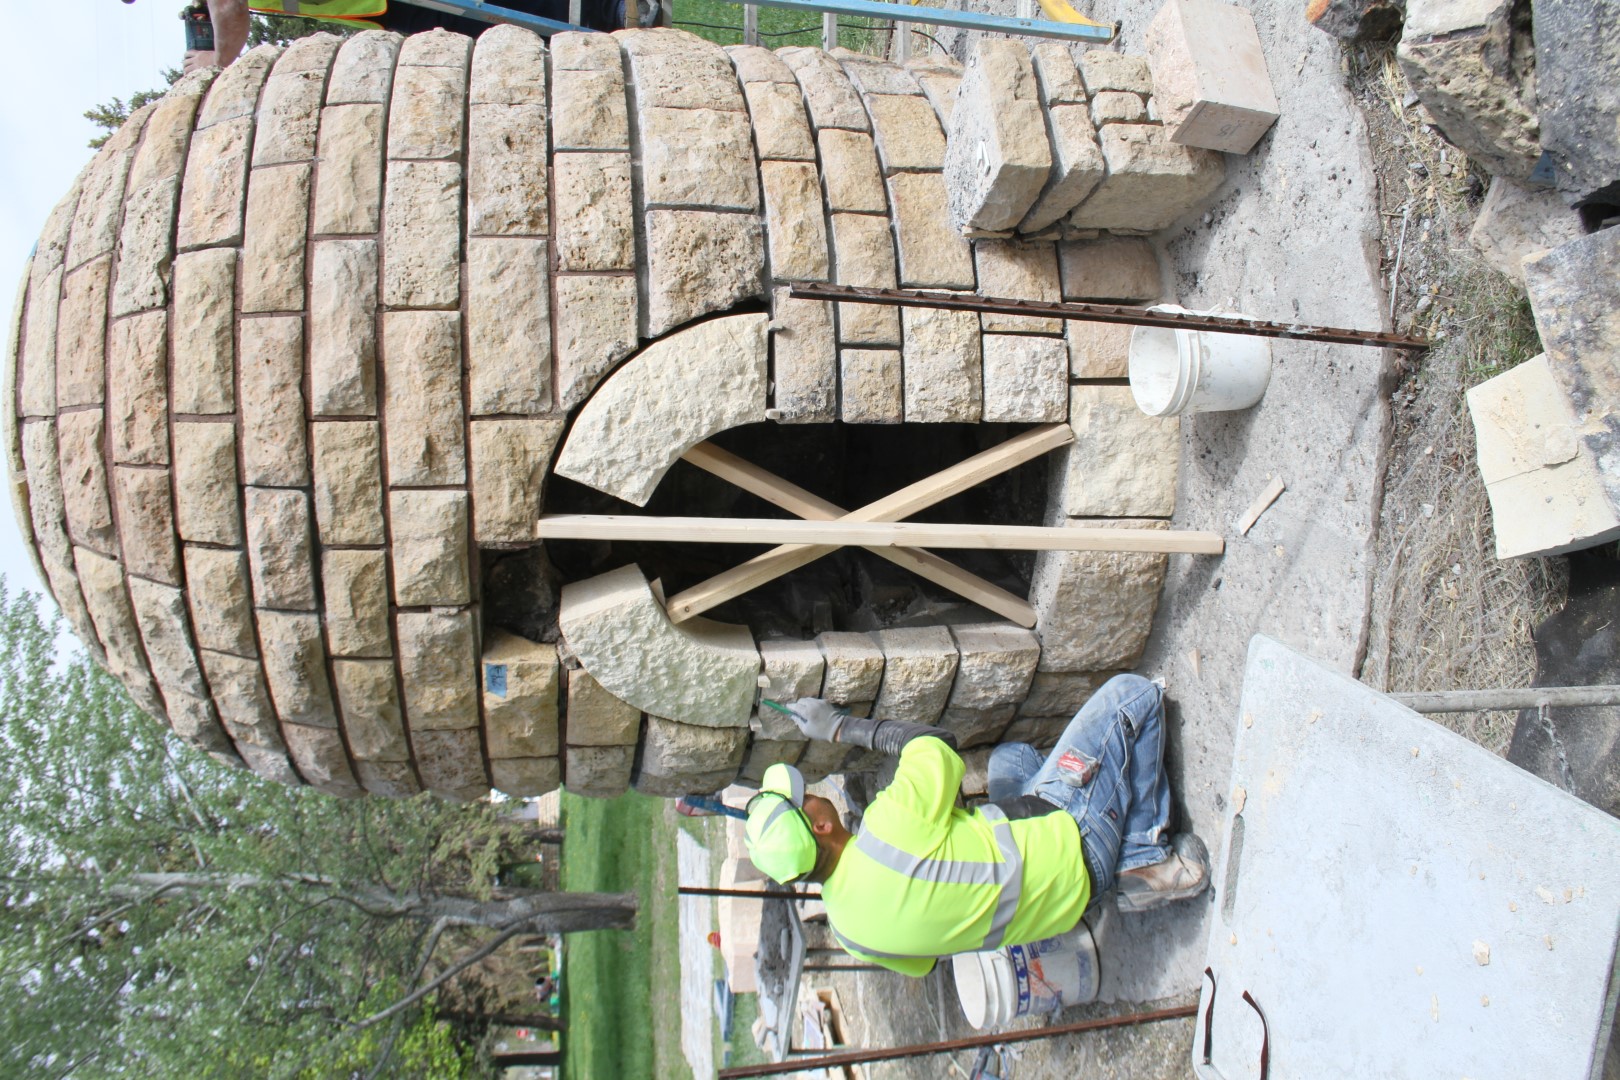 Stone “beehive” fireplace with mason installing new stones in arched opening where stones are missing